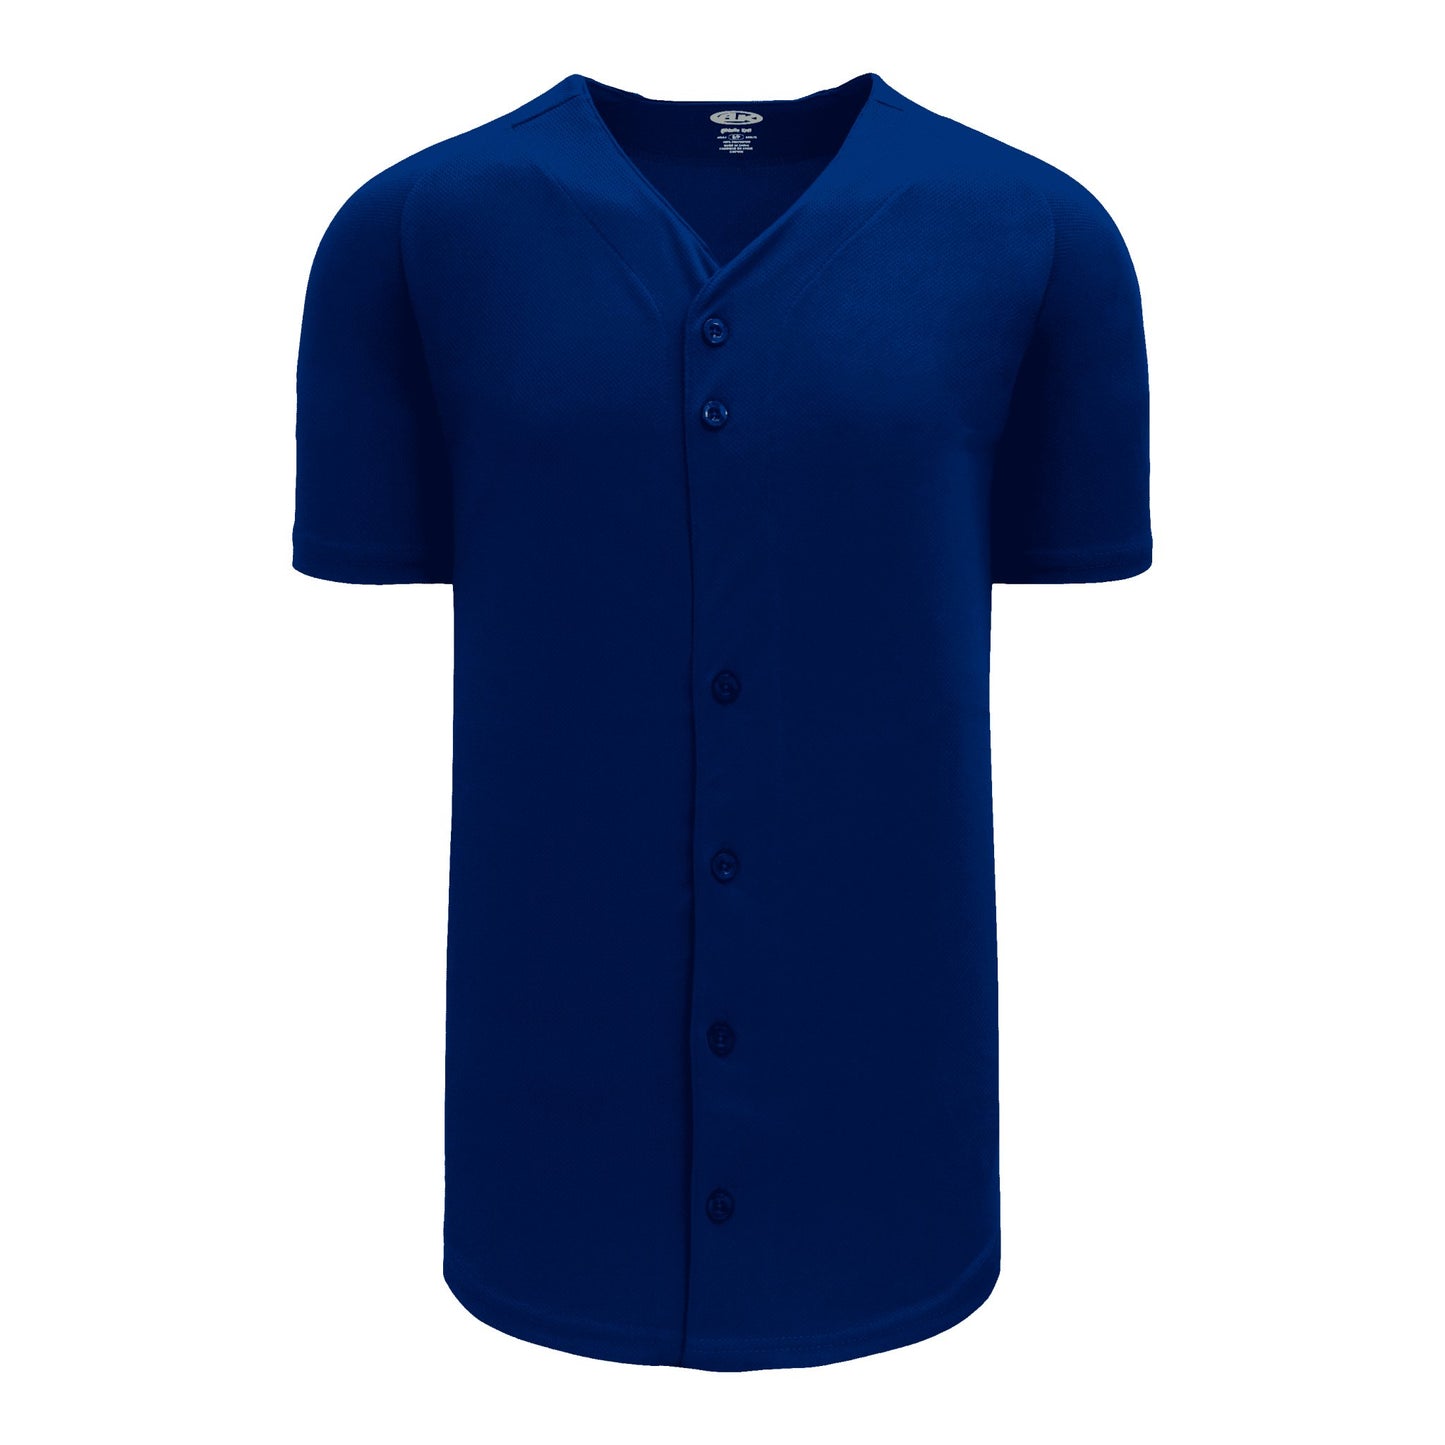 Full Button Baseball Jerseys: Solid Colours, Youth